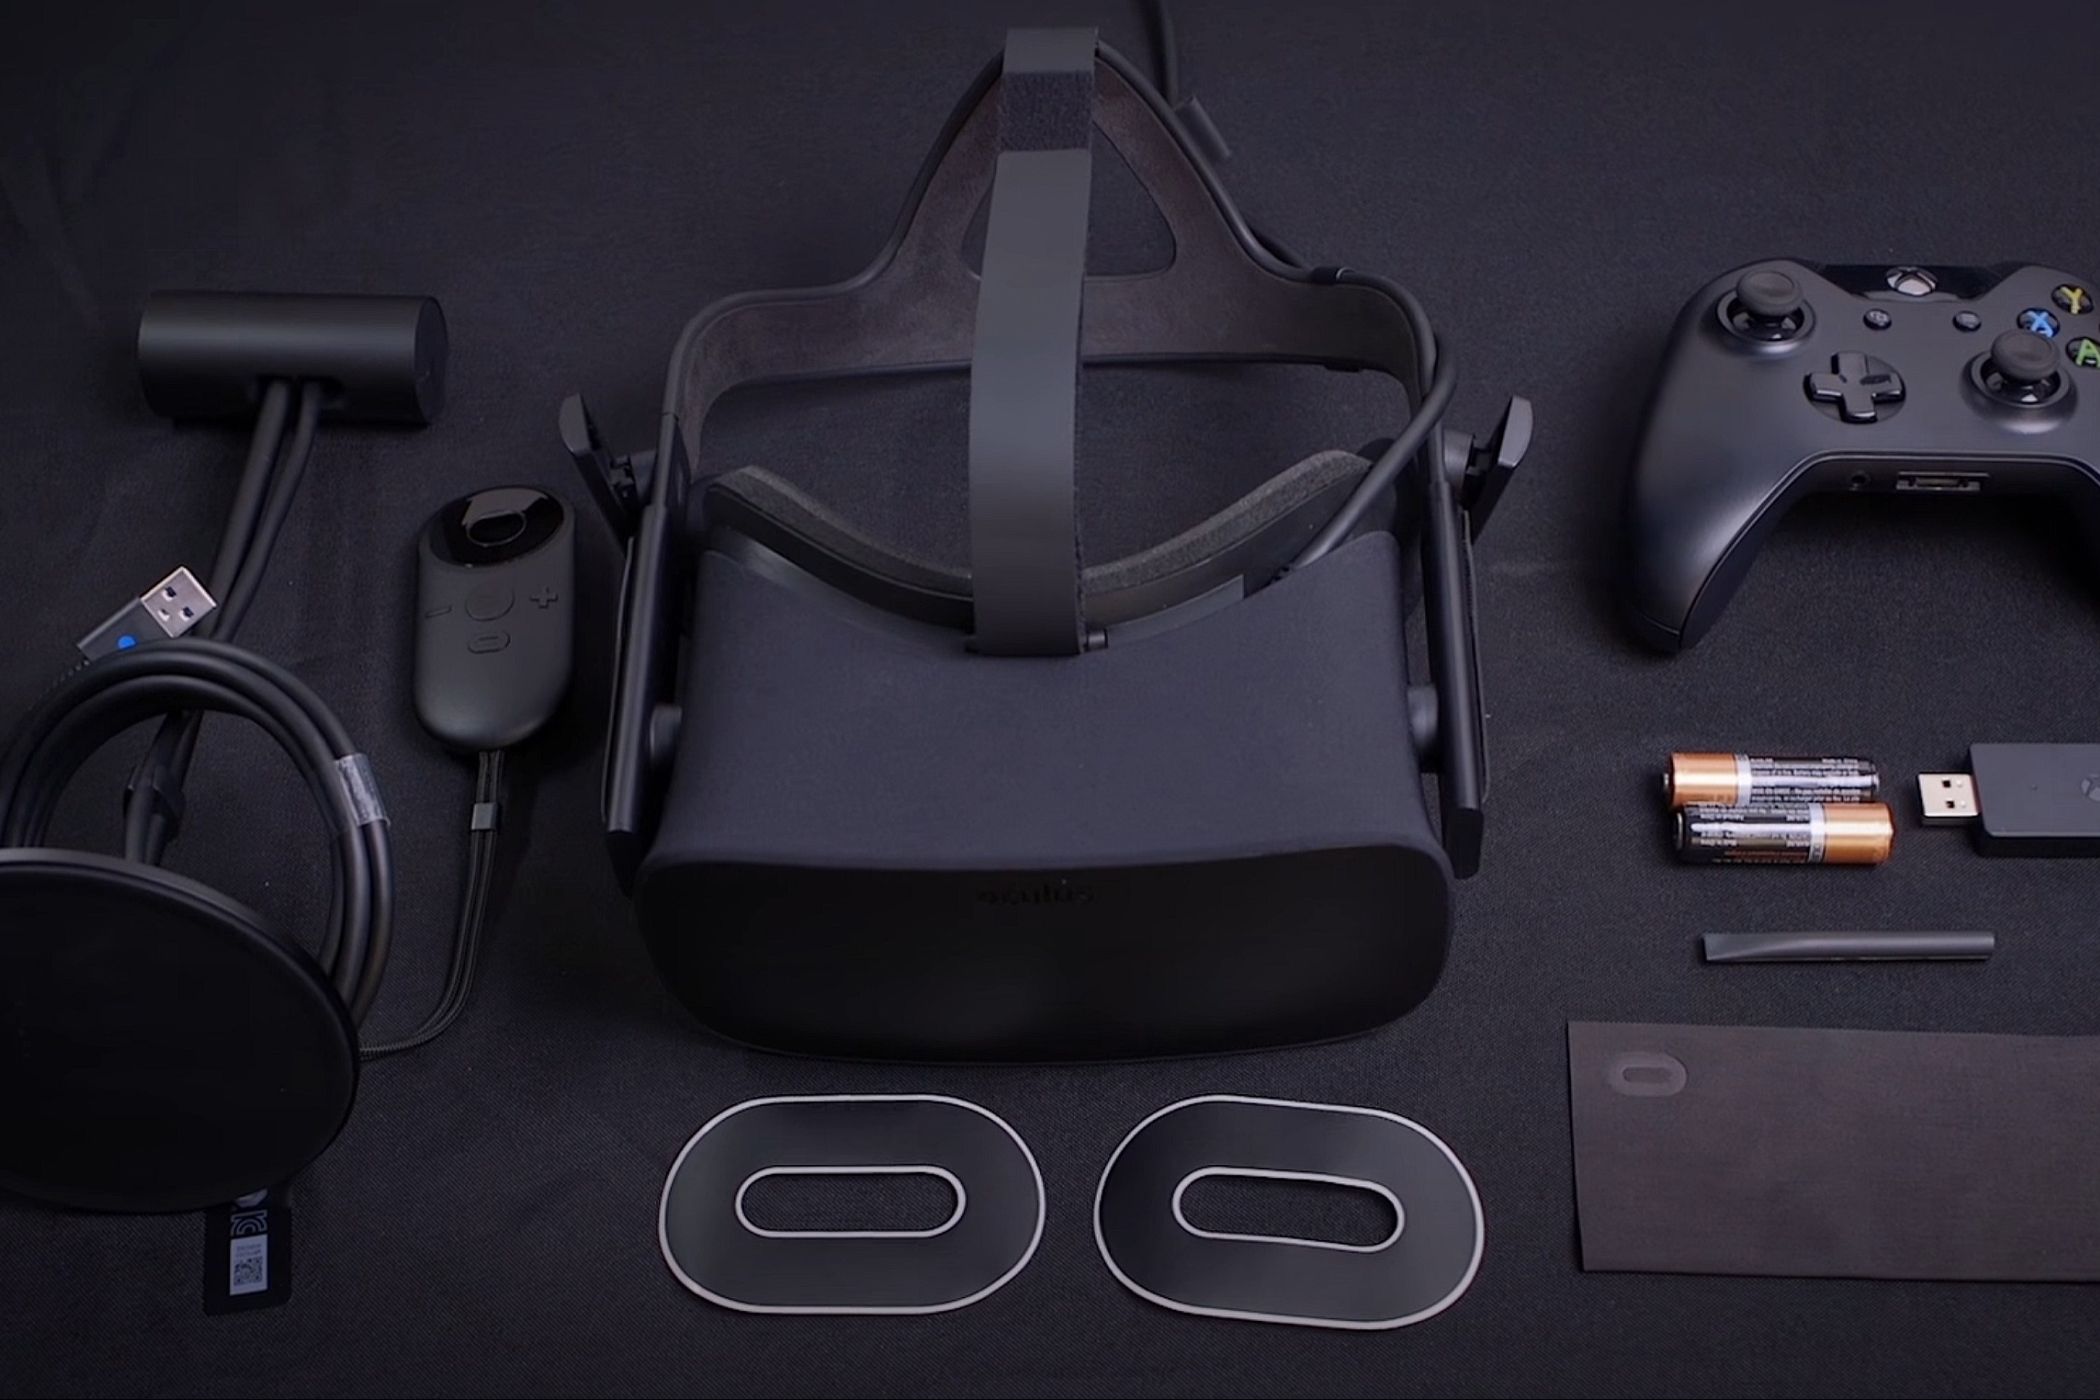 The Oculus Rift CV1 and its accessories